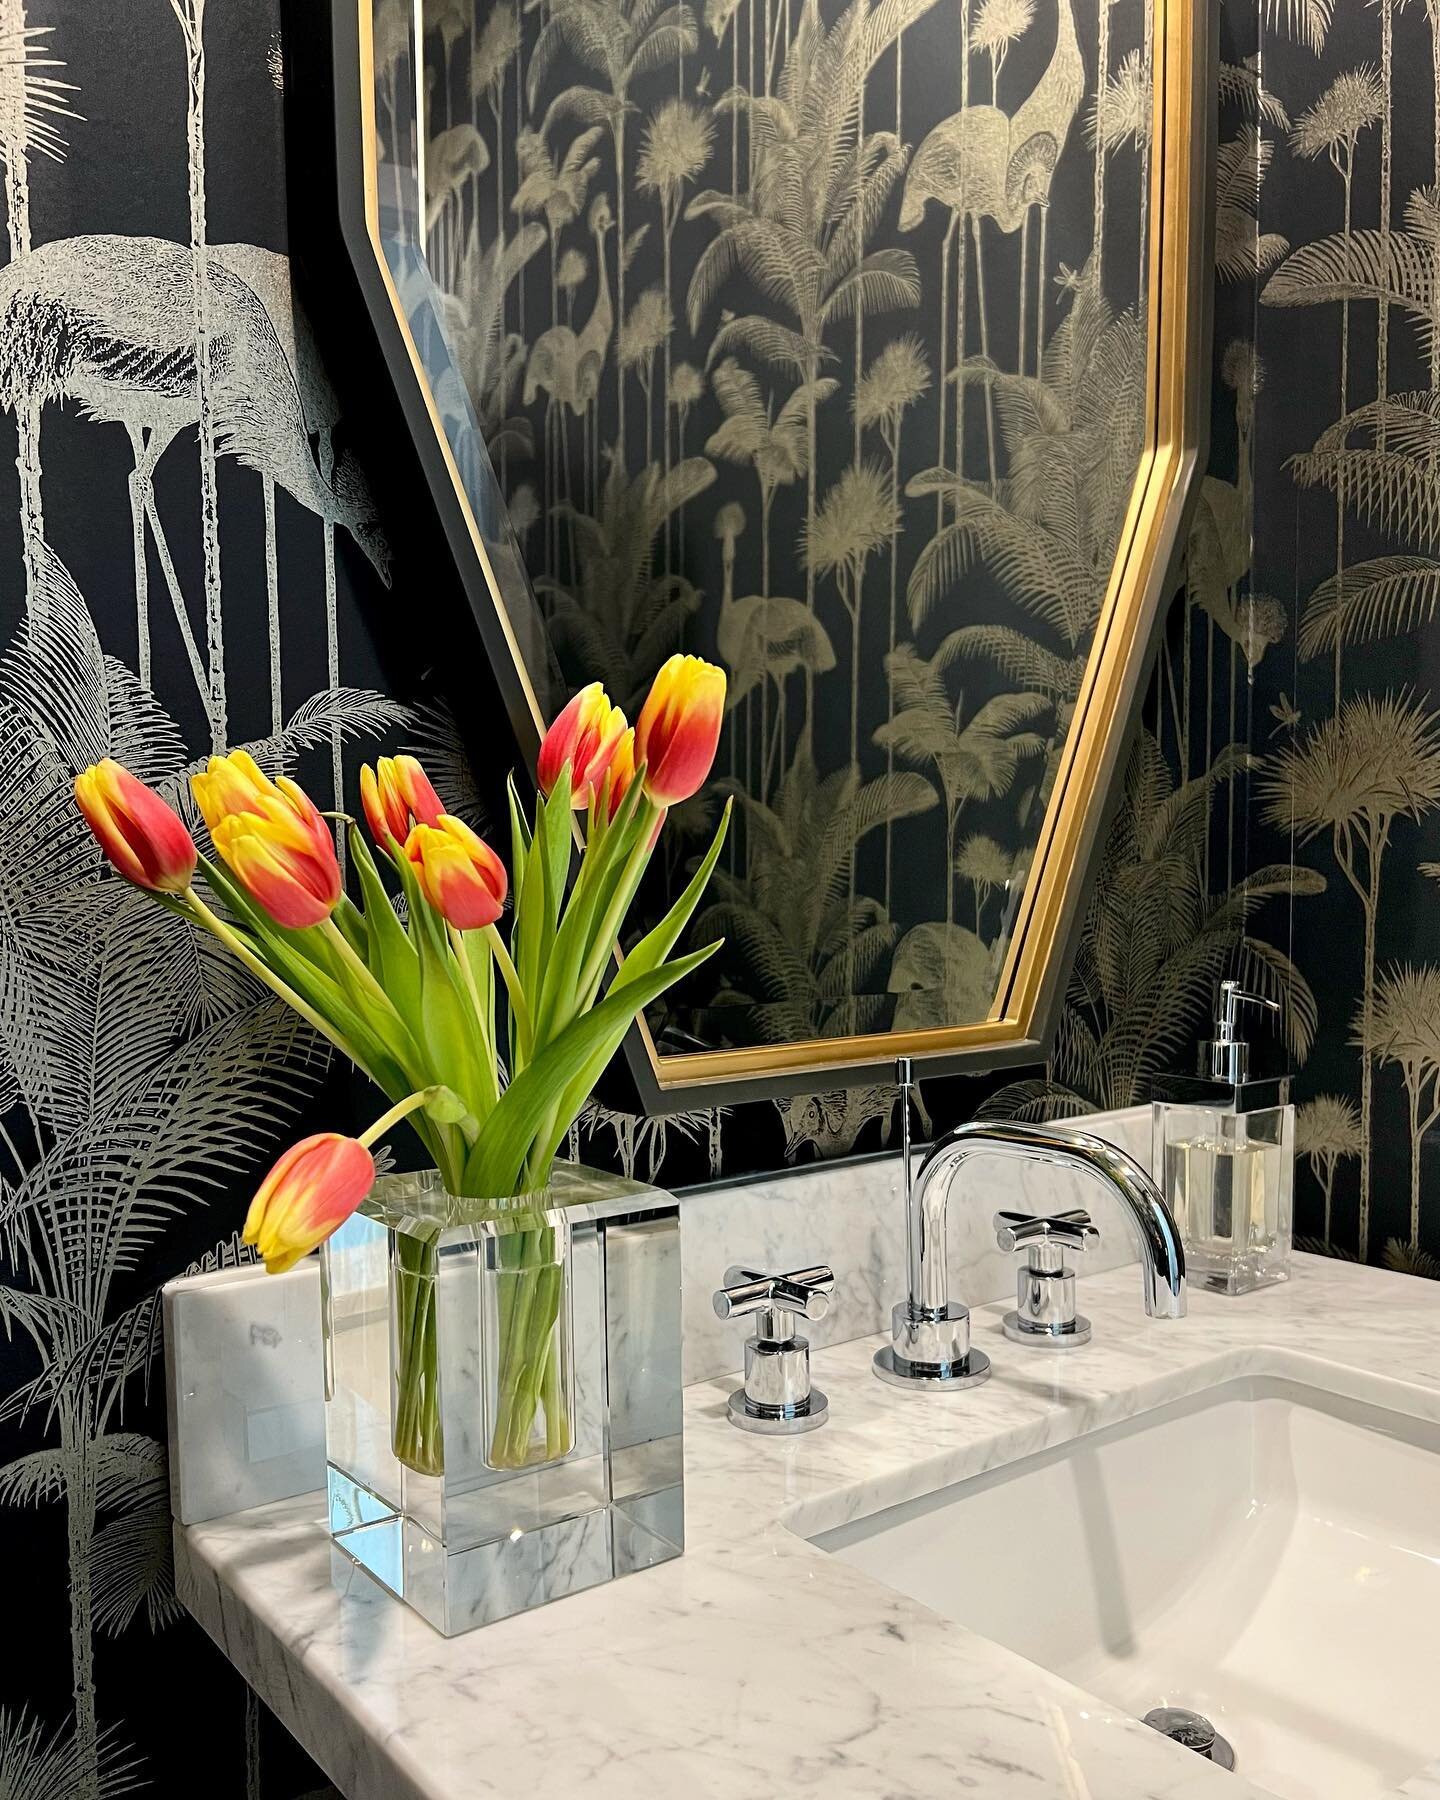 Something to brighten up your Monday! Happy first day of spring! 🌷✨ 
.
Fresh flowers + @divinesavages 🖤
.
.
.
.
.
.
.
.
.
.
.
.
.
.
.
.
.
.
.
.
.
.
.
.
#fifthandcranedesign #fifthandcrane #fifthandcranehome #interiordesigner #interiors #interiordes